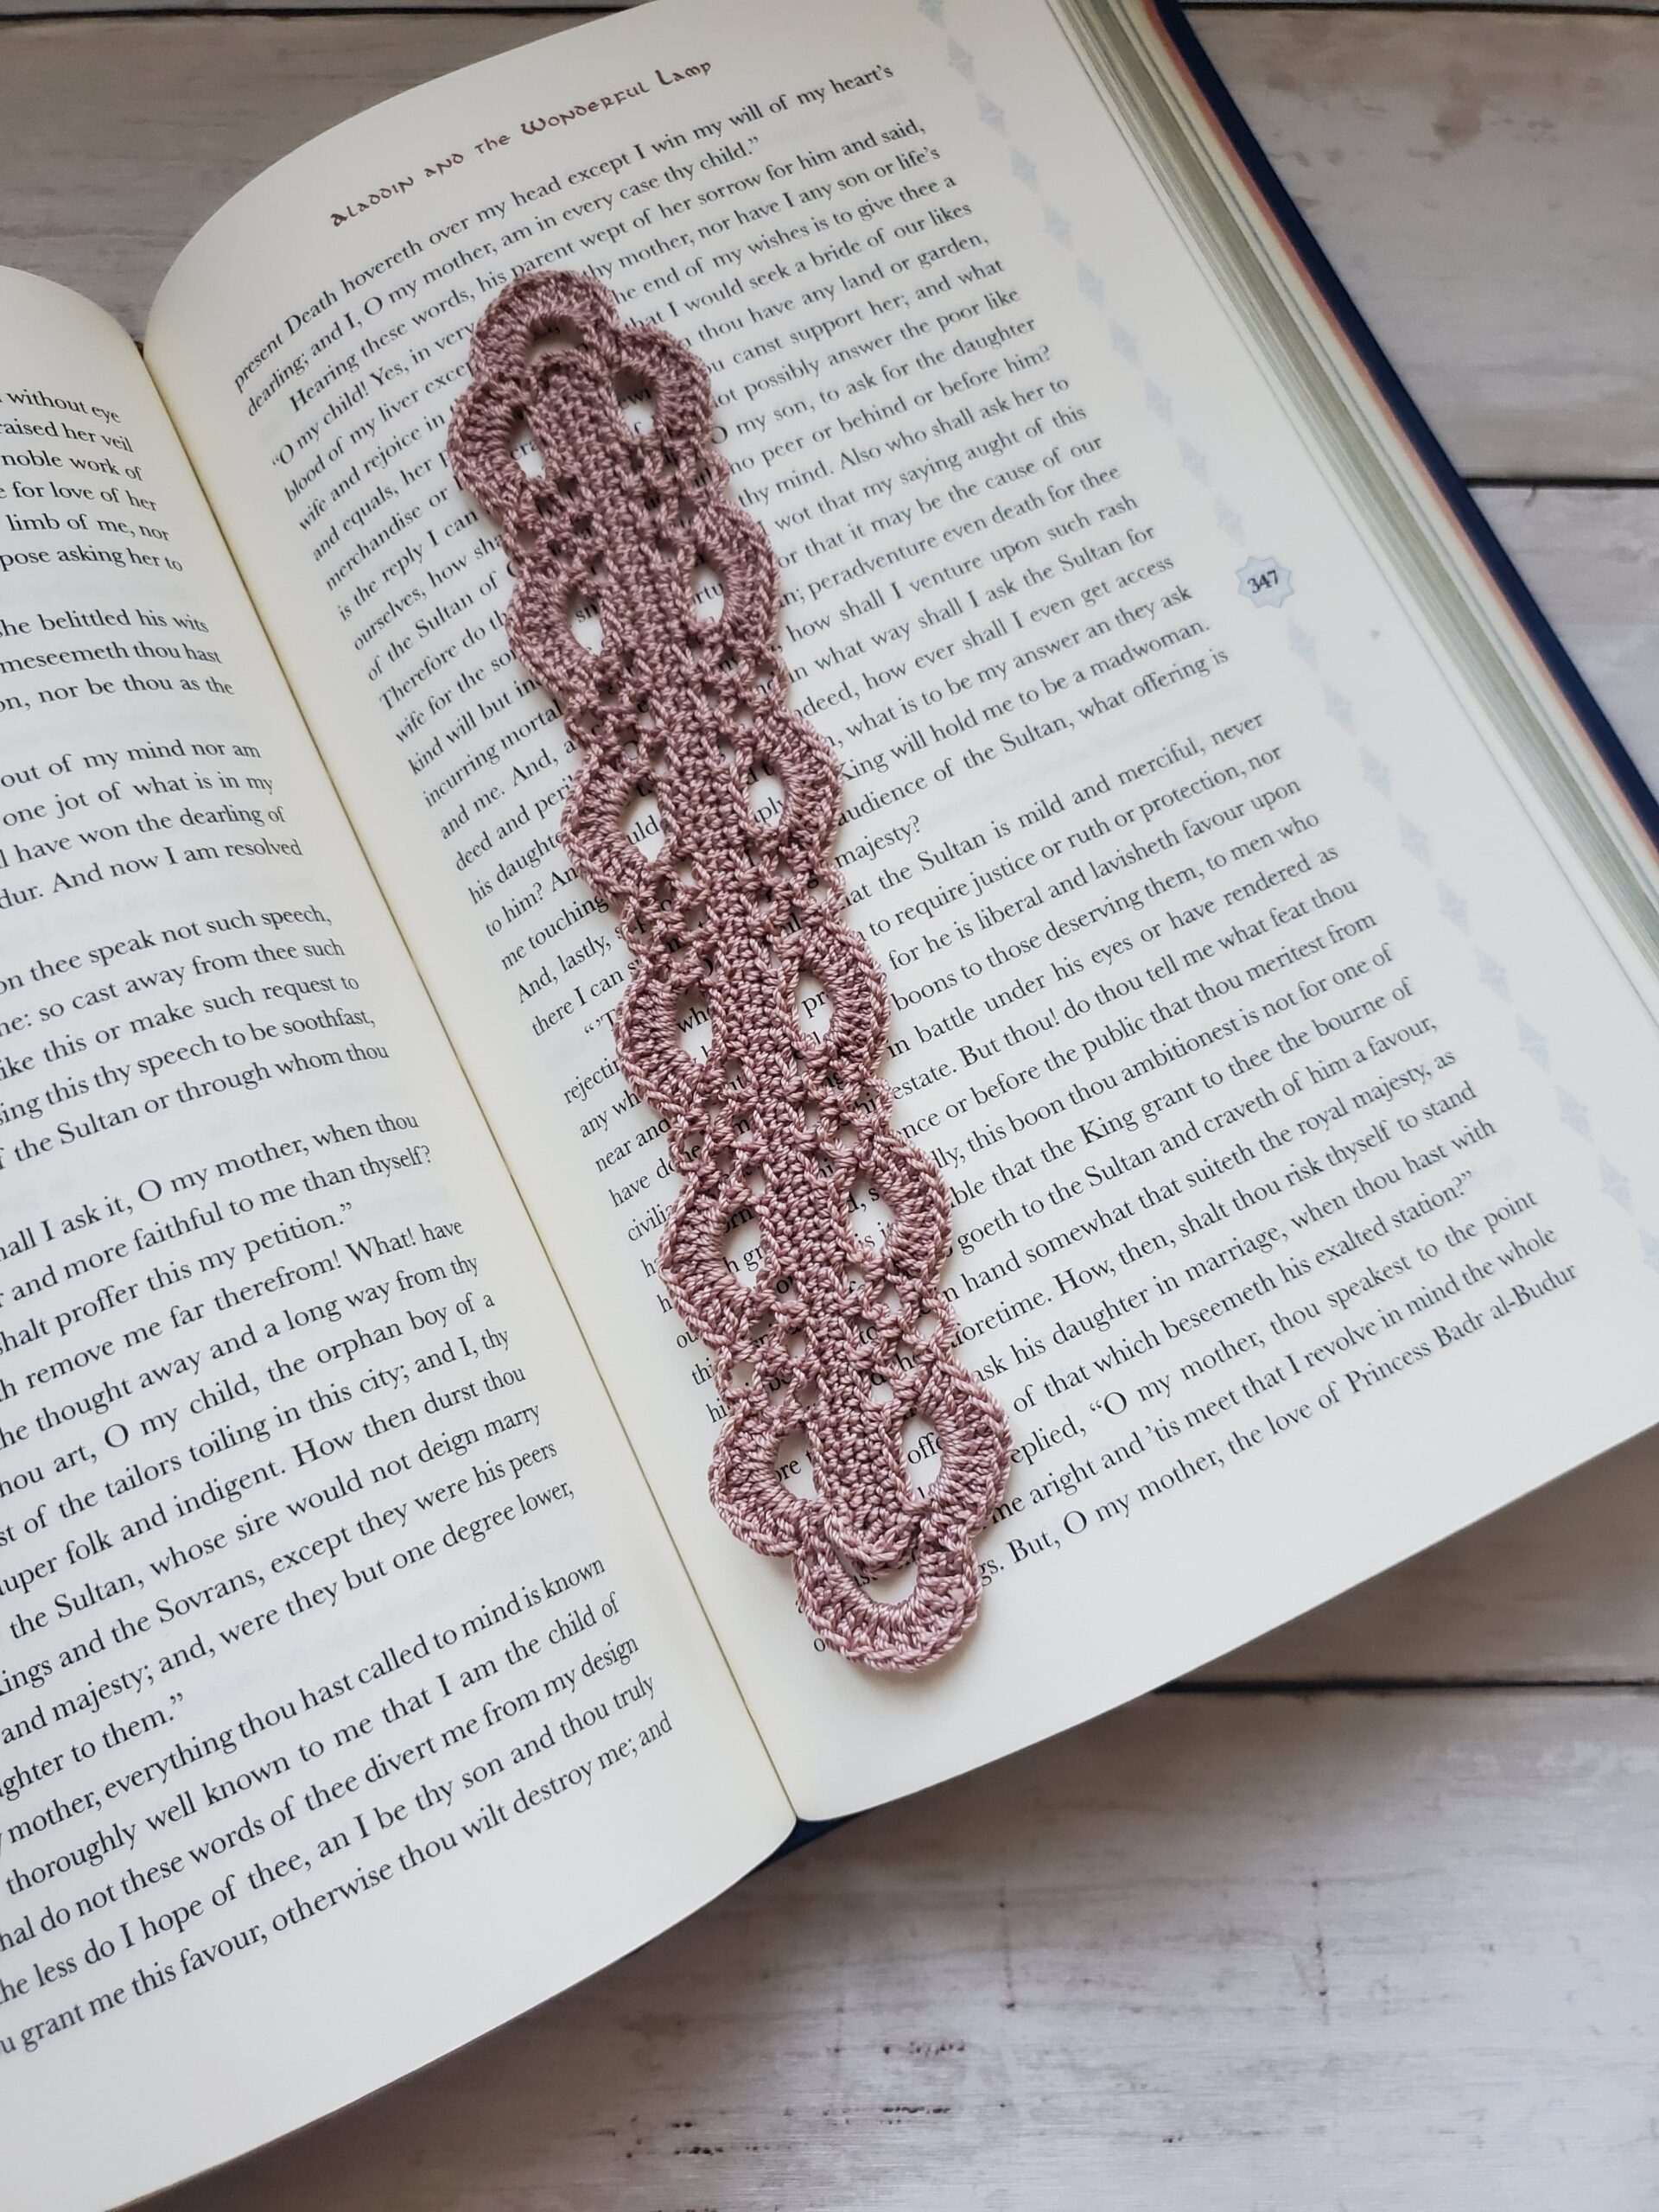 I want to purchase some crochet books to help me improve. Has